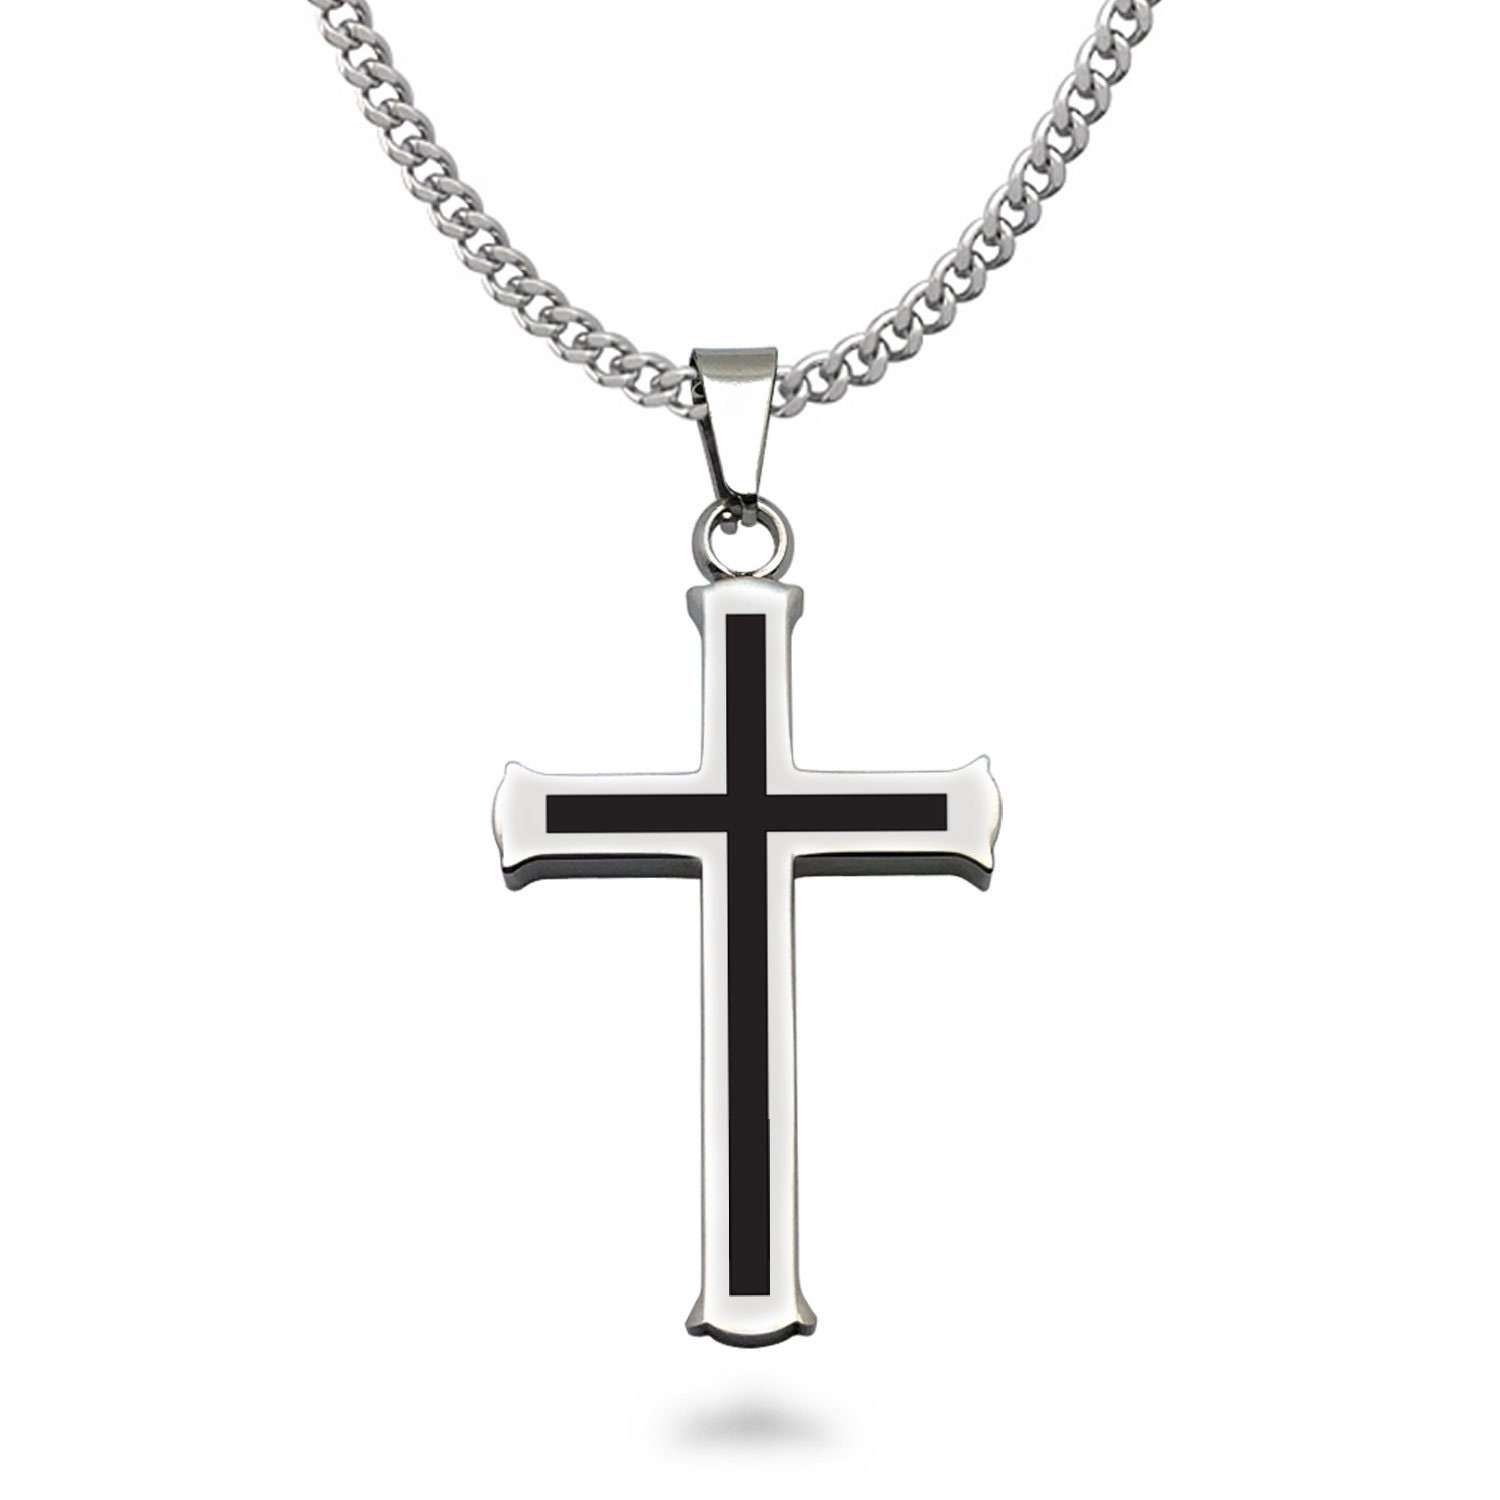 Solid Stainless Steel Sideways Cross Chain Necklace with Secure Lobster  Lock Clasp 21.5